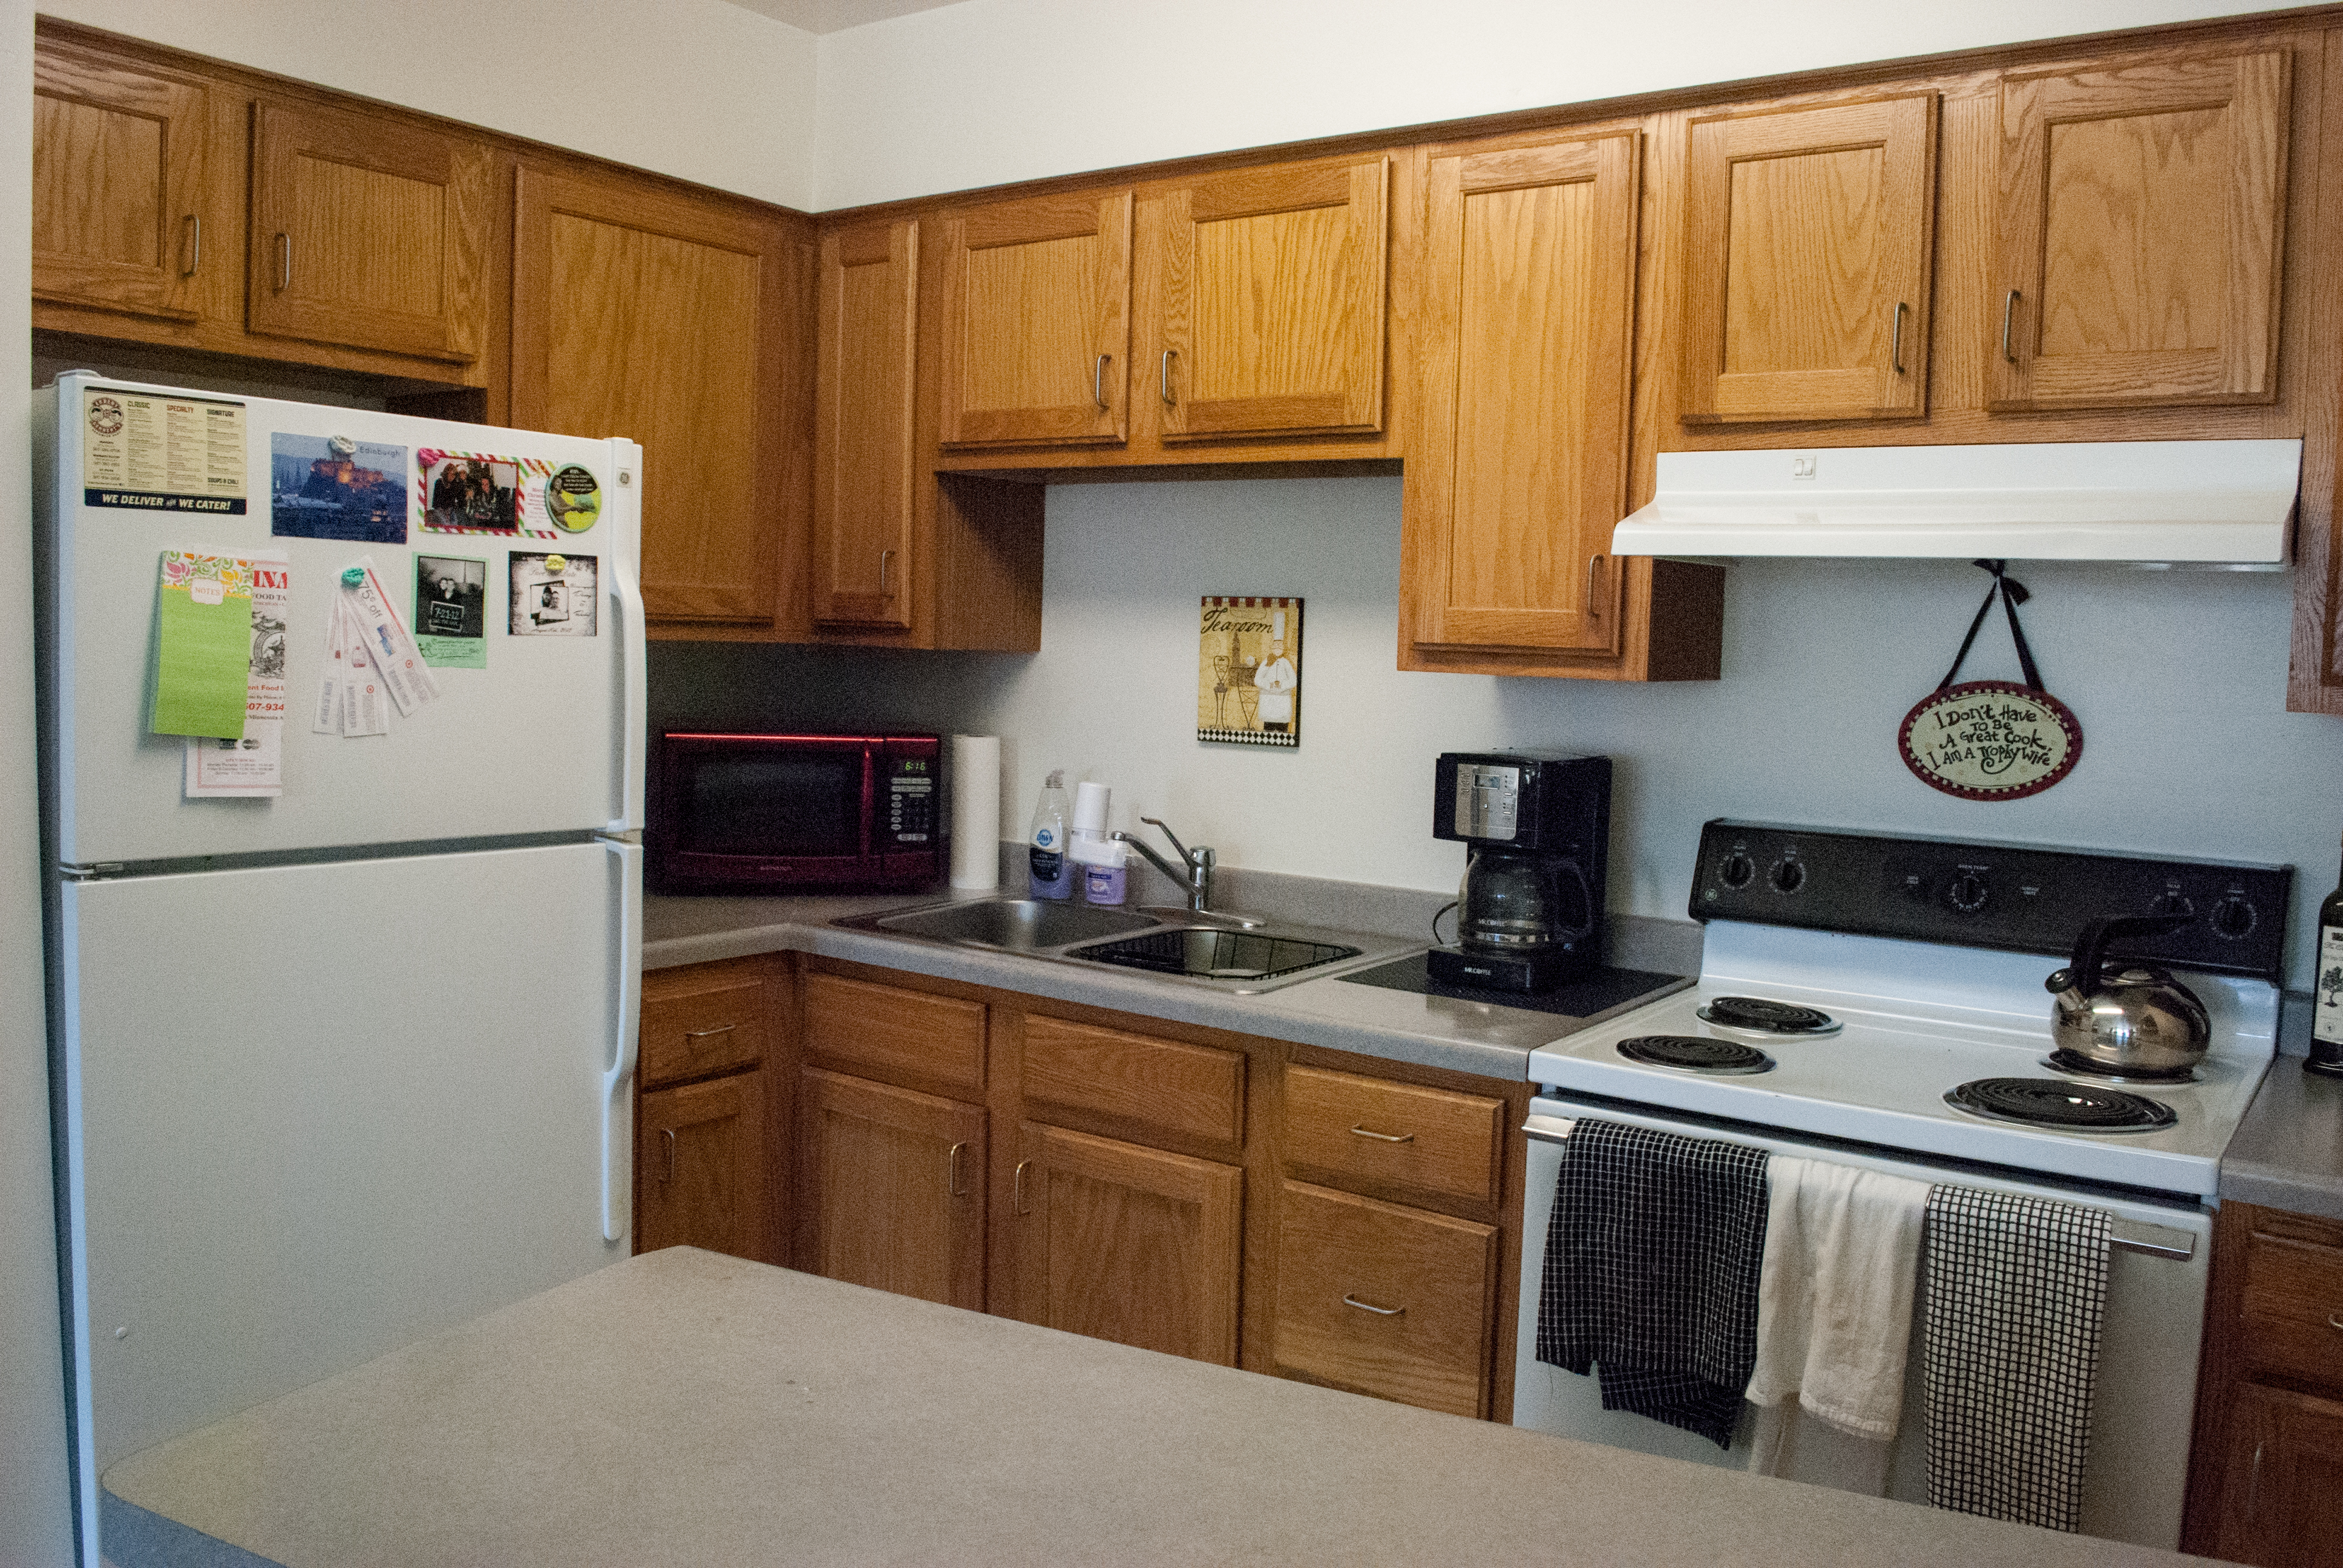 The kitchens in on-campus apartments are one of the reasons certain rooms require surcharges. Ambyr Pruitt.